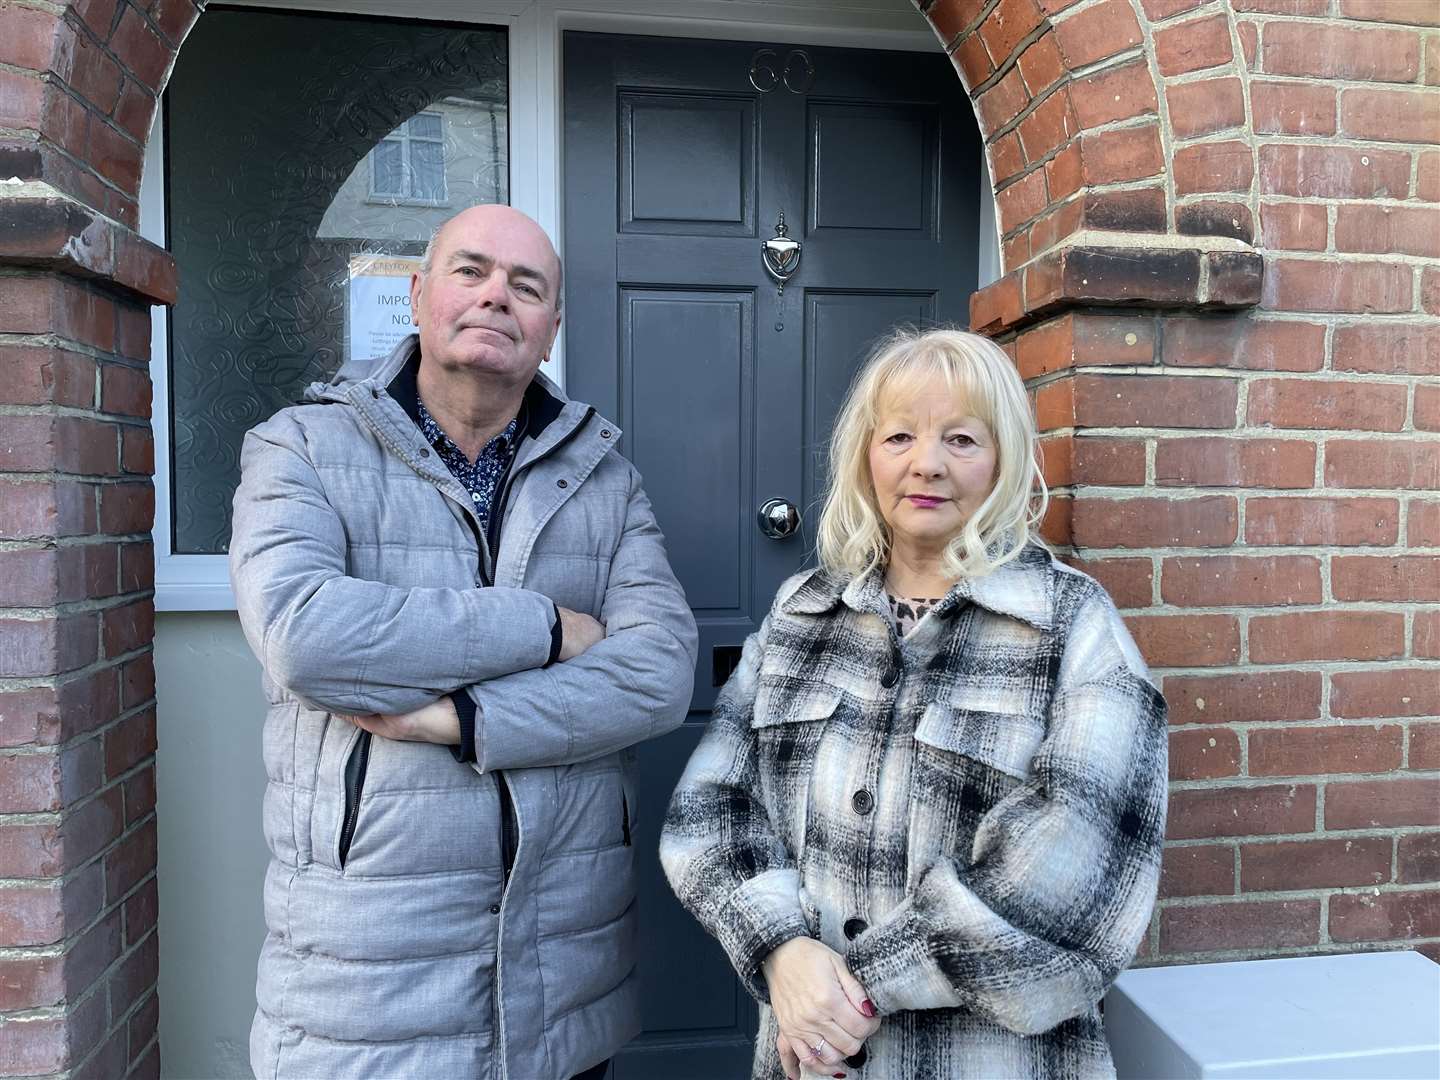 Landlady Kathryn Wareham (right) and her husband say they discovered a family living without permission in their rented-out home in Chatham